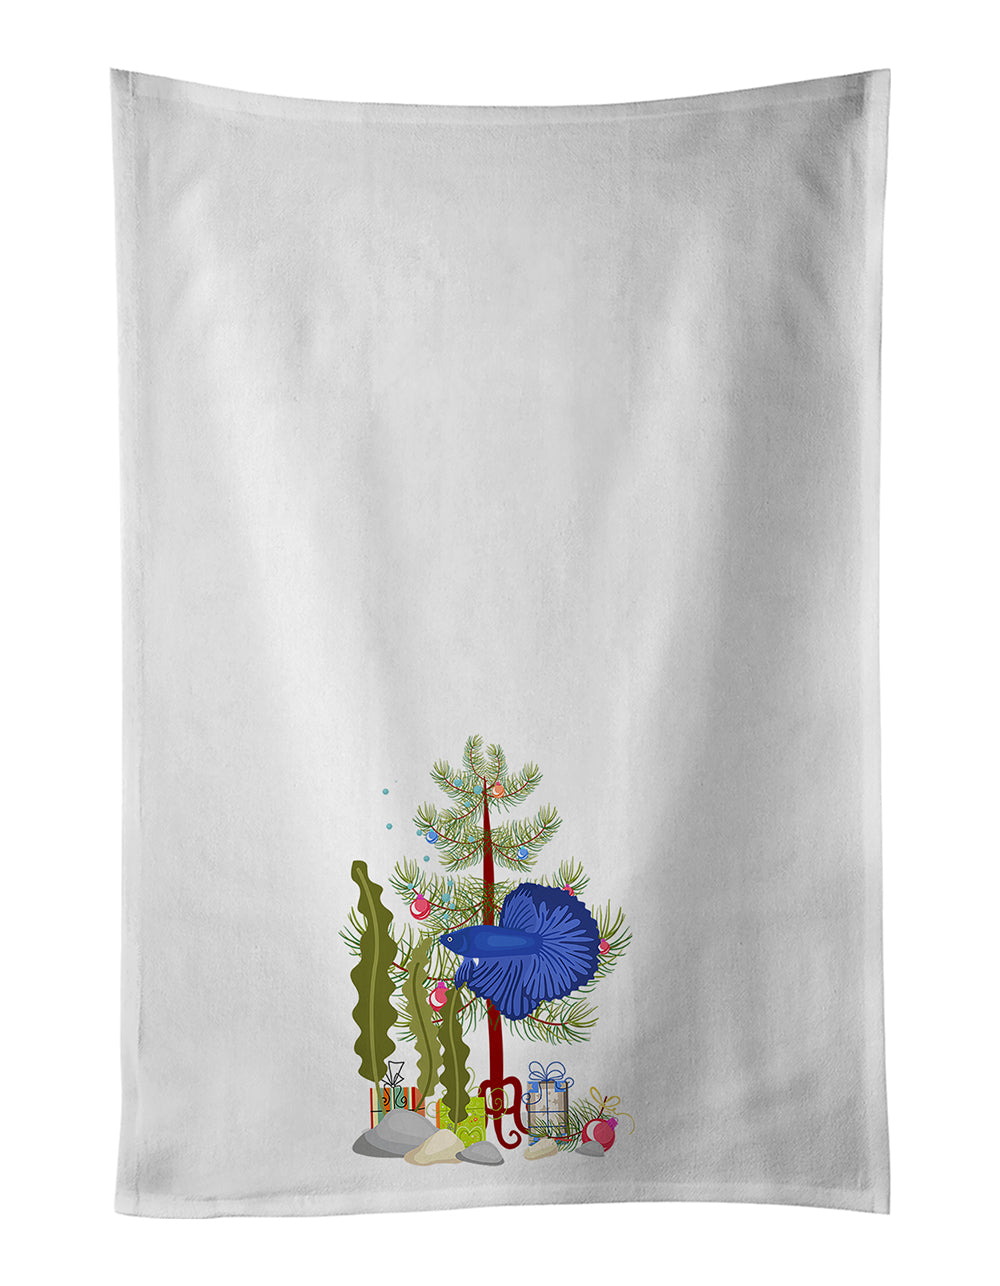 Buy this Delta Tail Betta Fish Merry Christmas White Kitchen Towel Set of 2